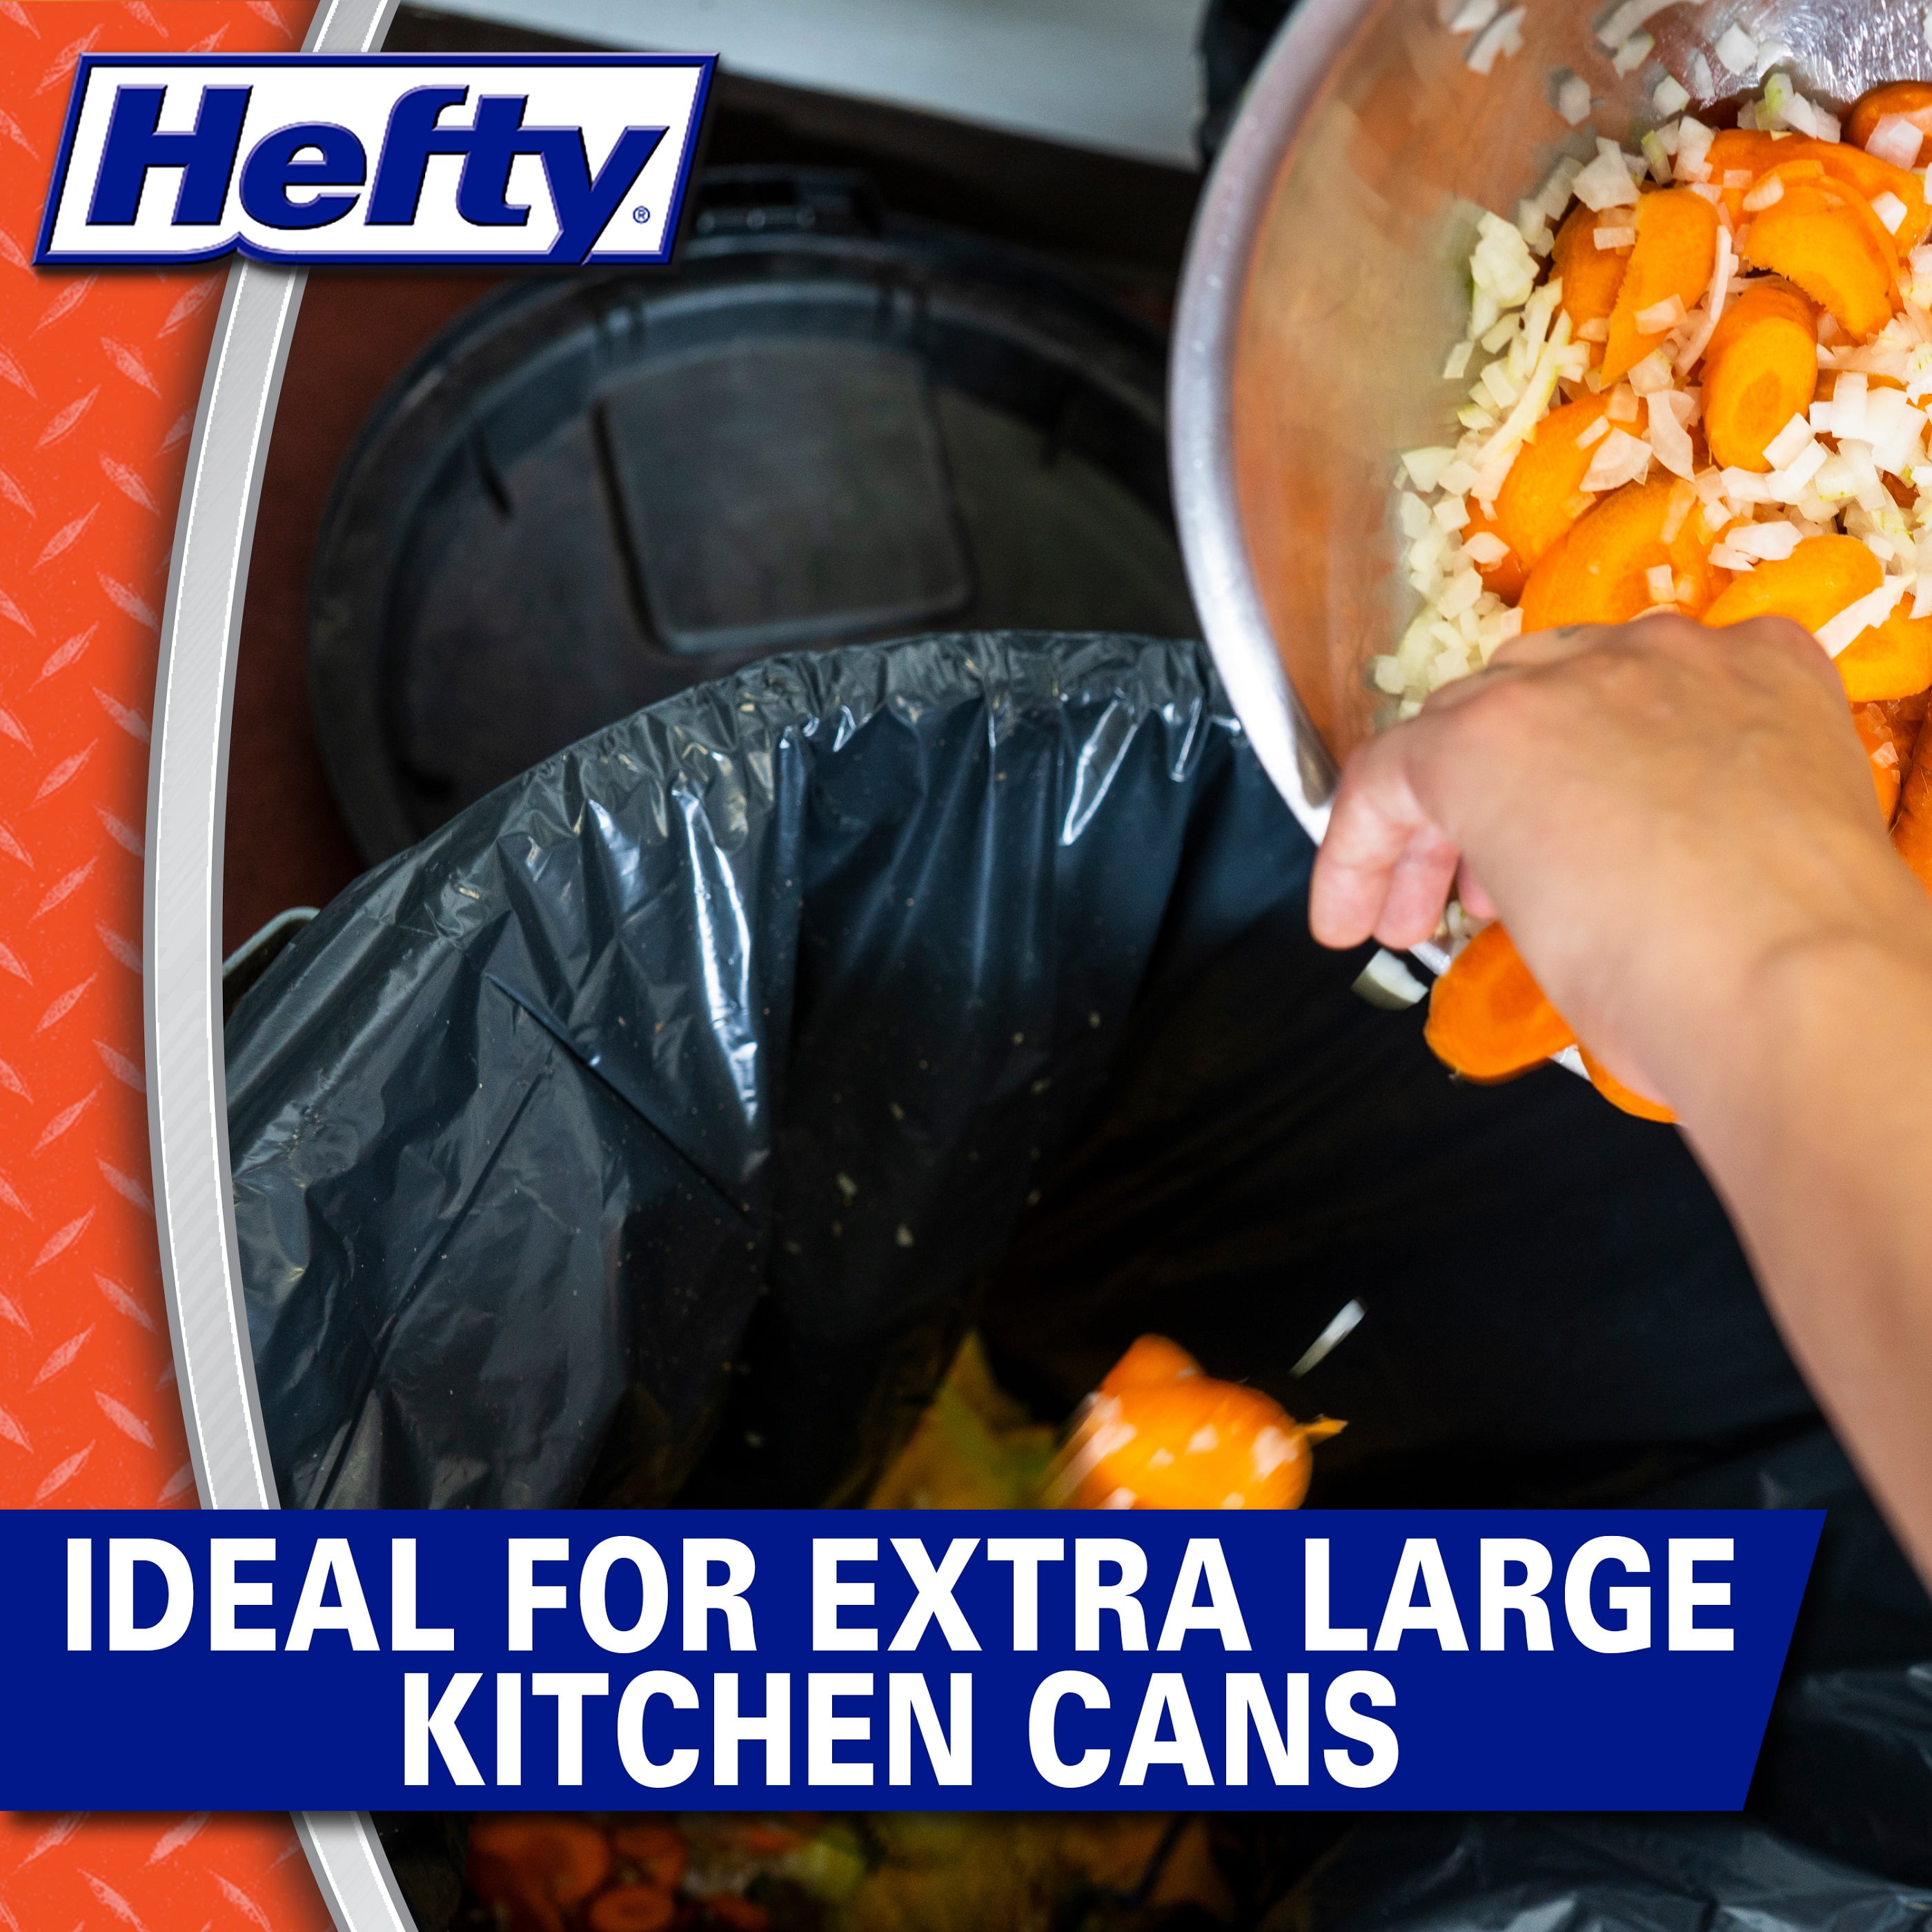 Hefty Strong Extra Large Trash Bags, 33 Gallon, 40 Count